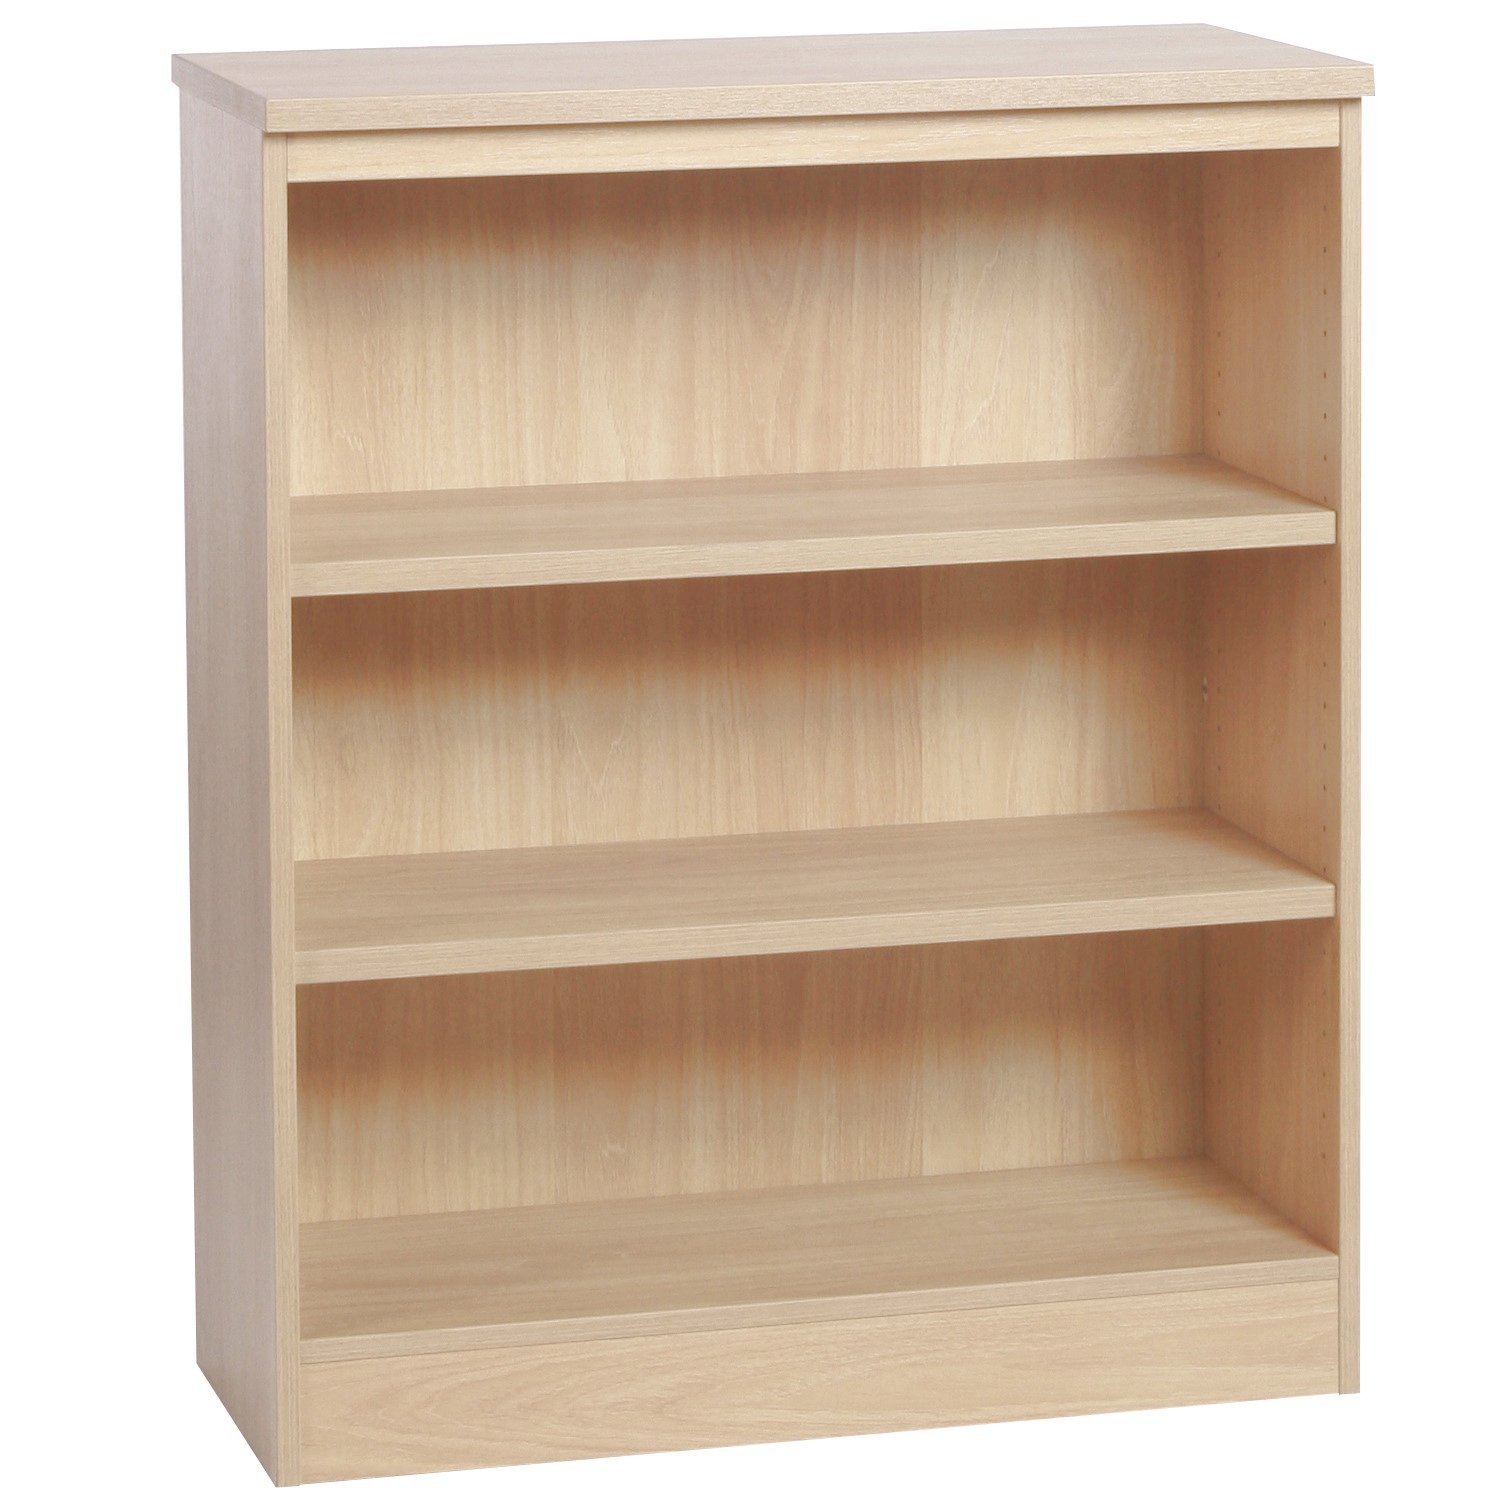 Mid Height Bookcase 850mm Wide